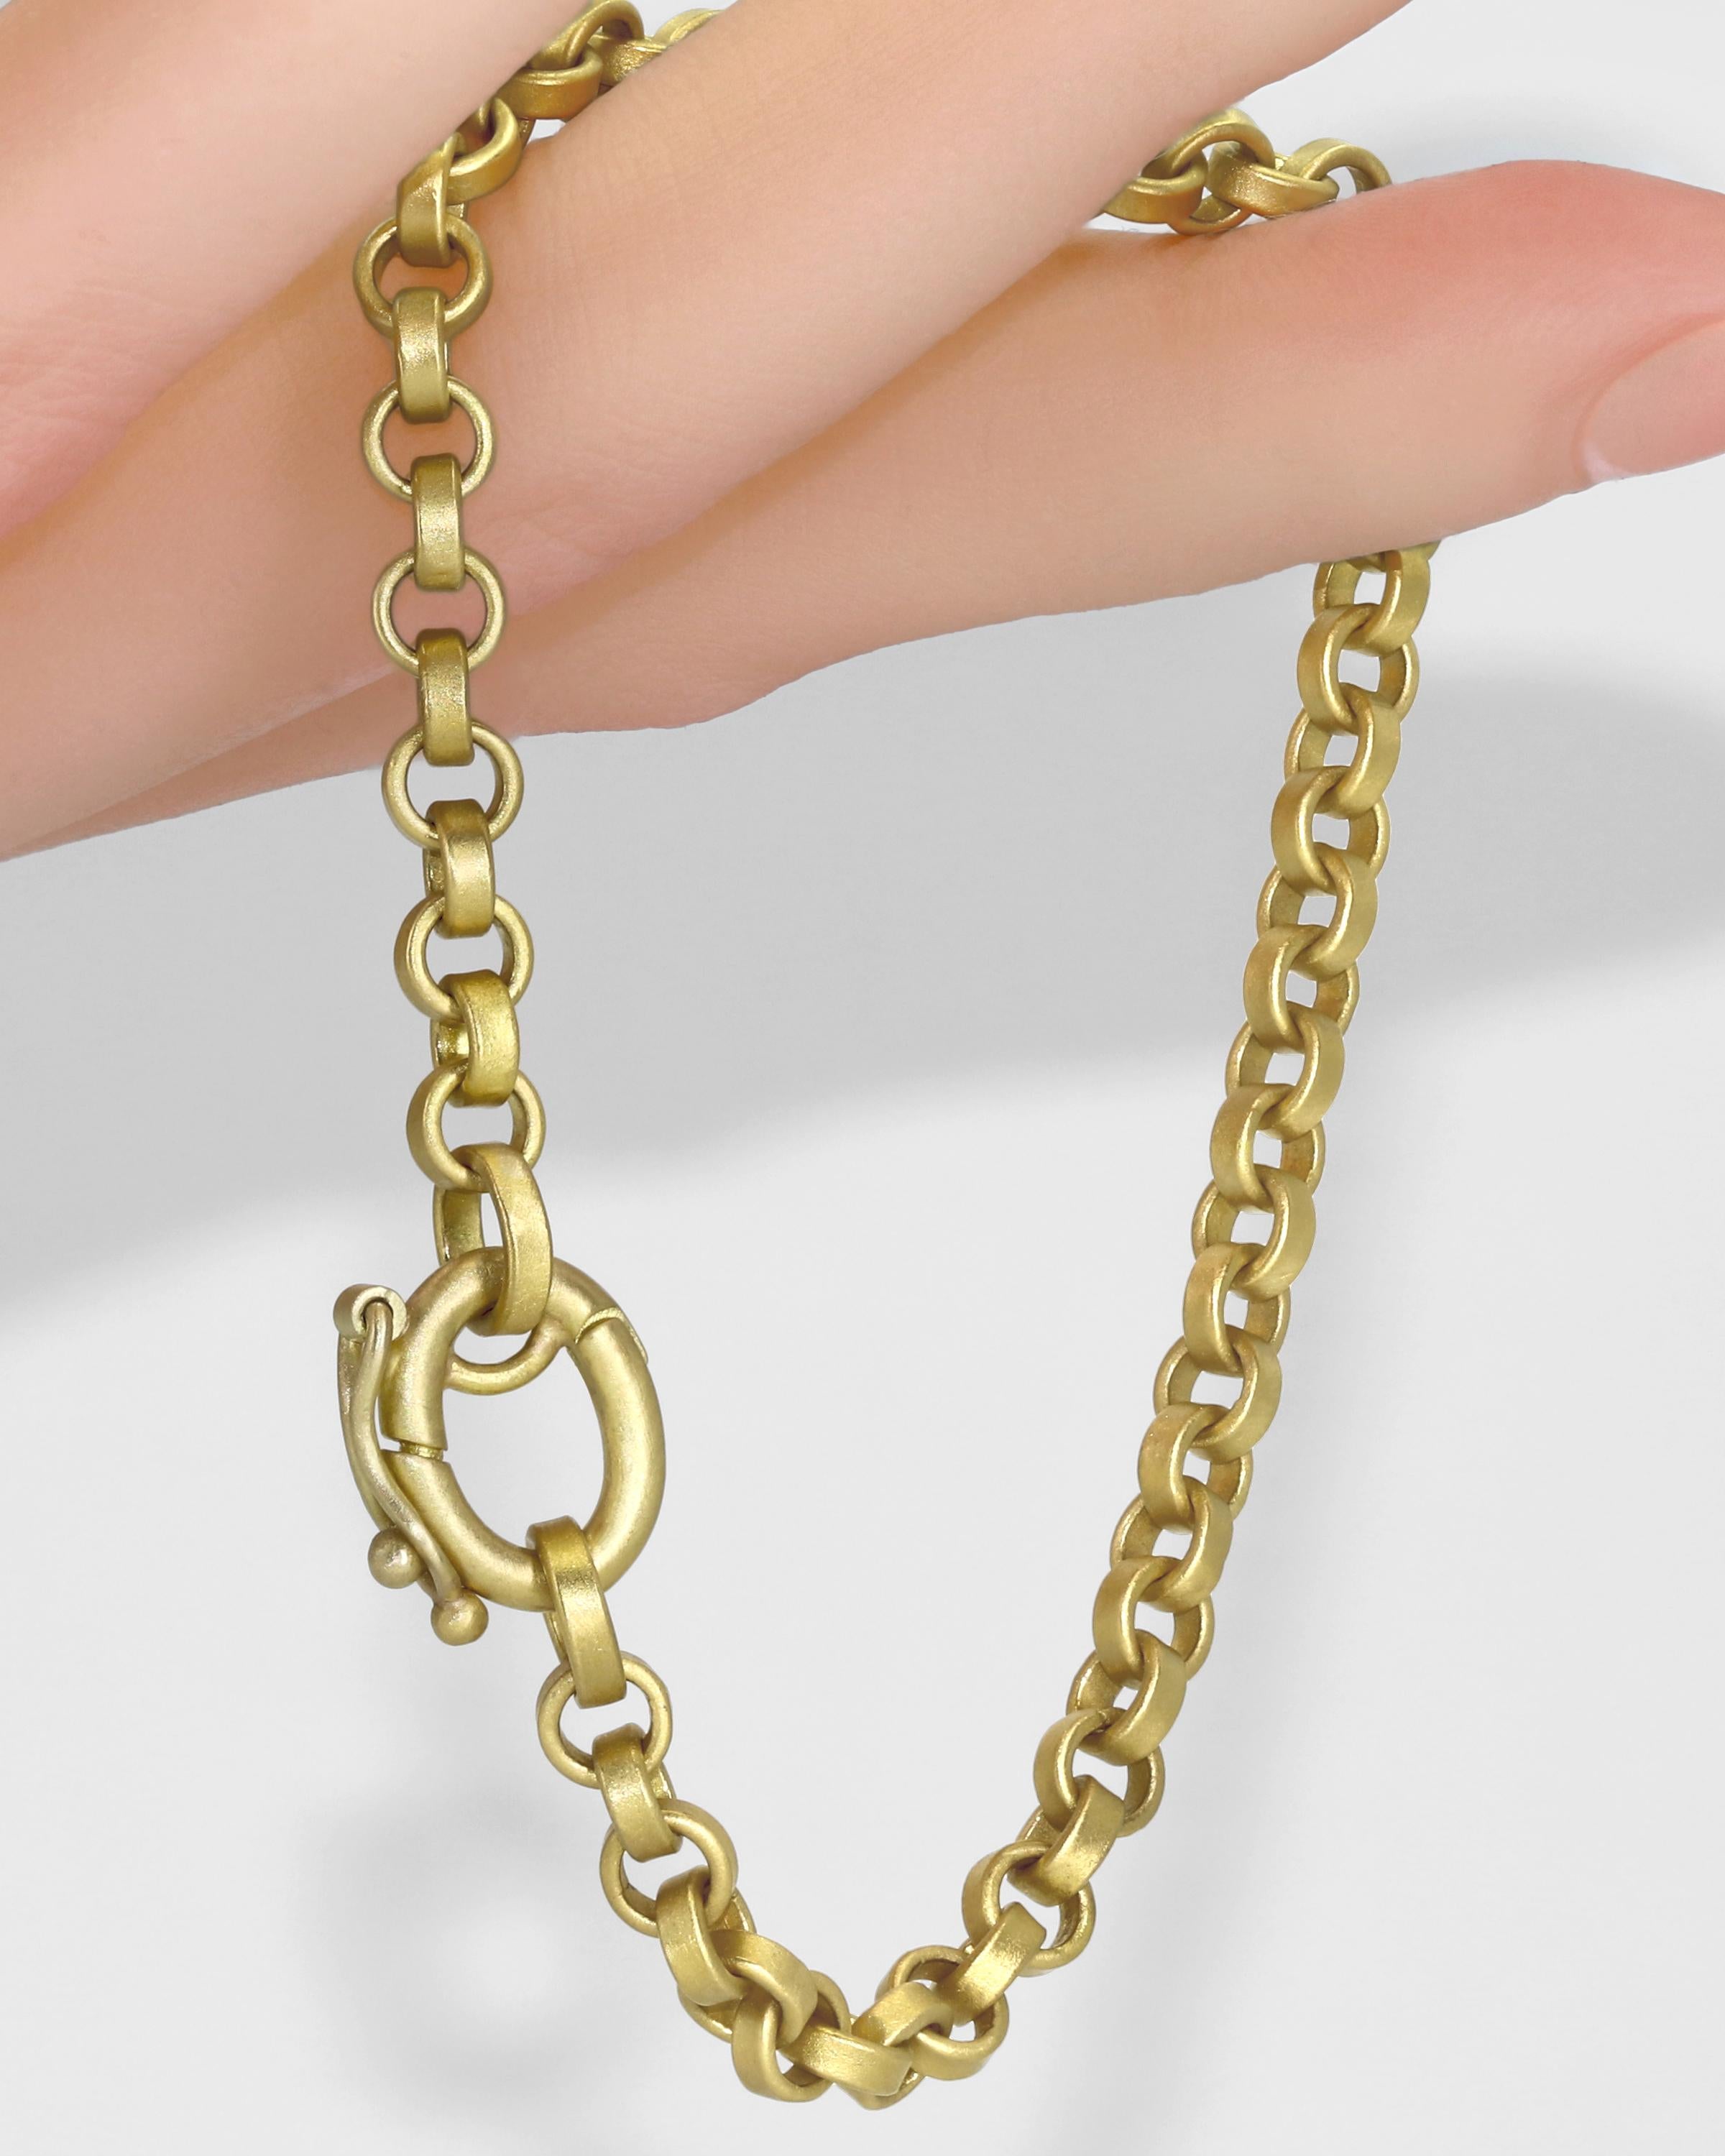 Handmade Heavy 4mm Round Rolo Link Chain Bracelet by jewelry maker Denise Betesh featuring individually hand-fabricated heavy round rolo links in the artist's signature-finished 22k yellow gold and finished with a beautiful handmade double-locking